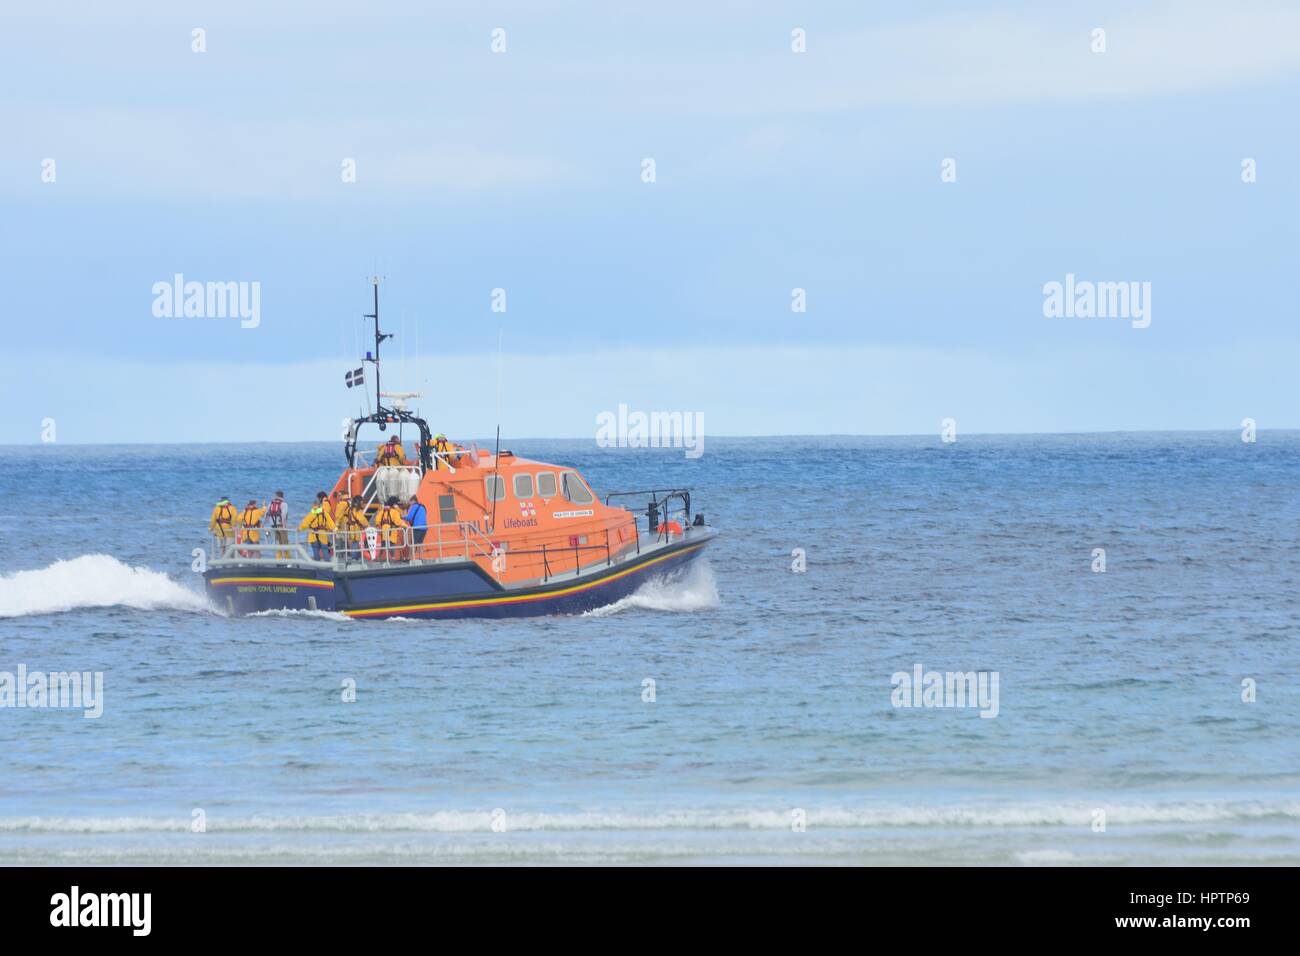 Sennen Cove Cornwall , United Kingdom - July 02, 2016:  RNLI lifeboat heading out to sea Stock Photo